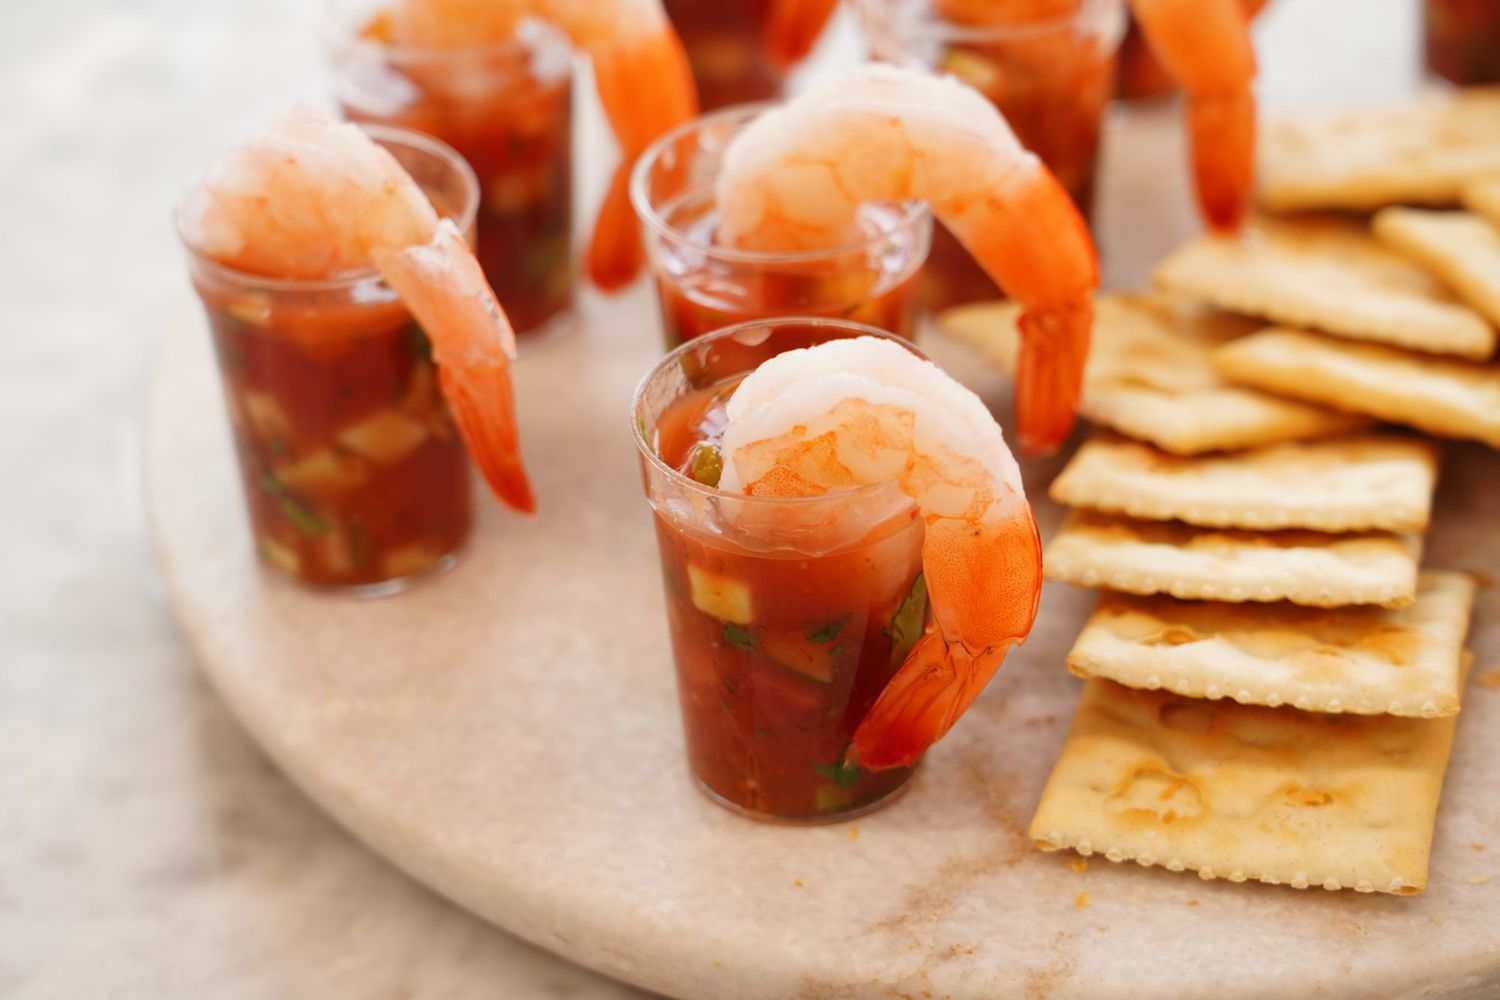 Authentic Mexican Shrimp Cocktail (Coctel de Camarones estilo Mexicano) served in individual shot glasses with saltine crackers on the side